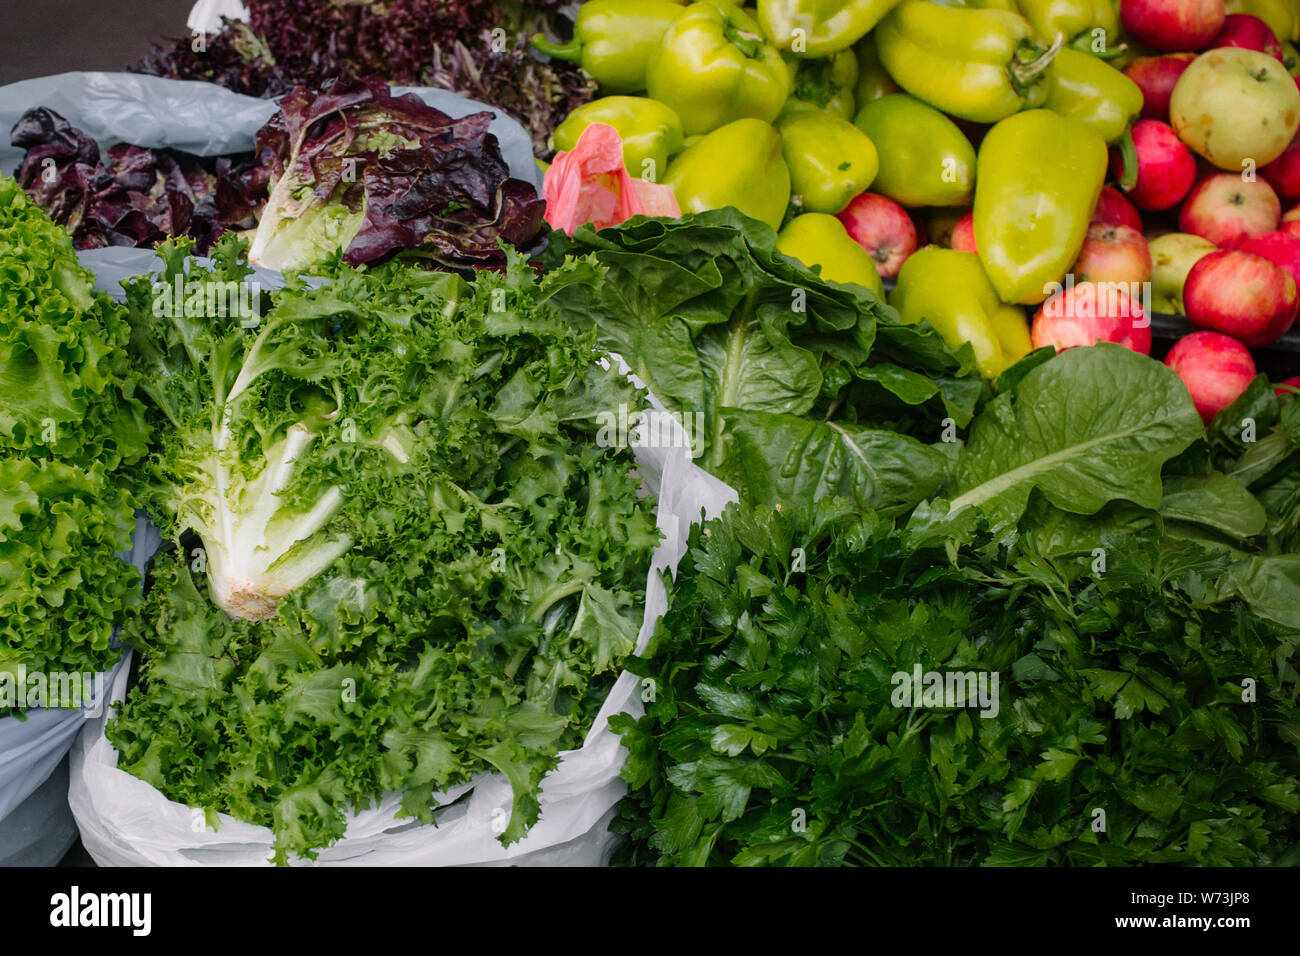 healthy food and nutrition on the counter, diet and vegetarian concept. Vitamin set of various green leafy vegetables Stock Photo